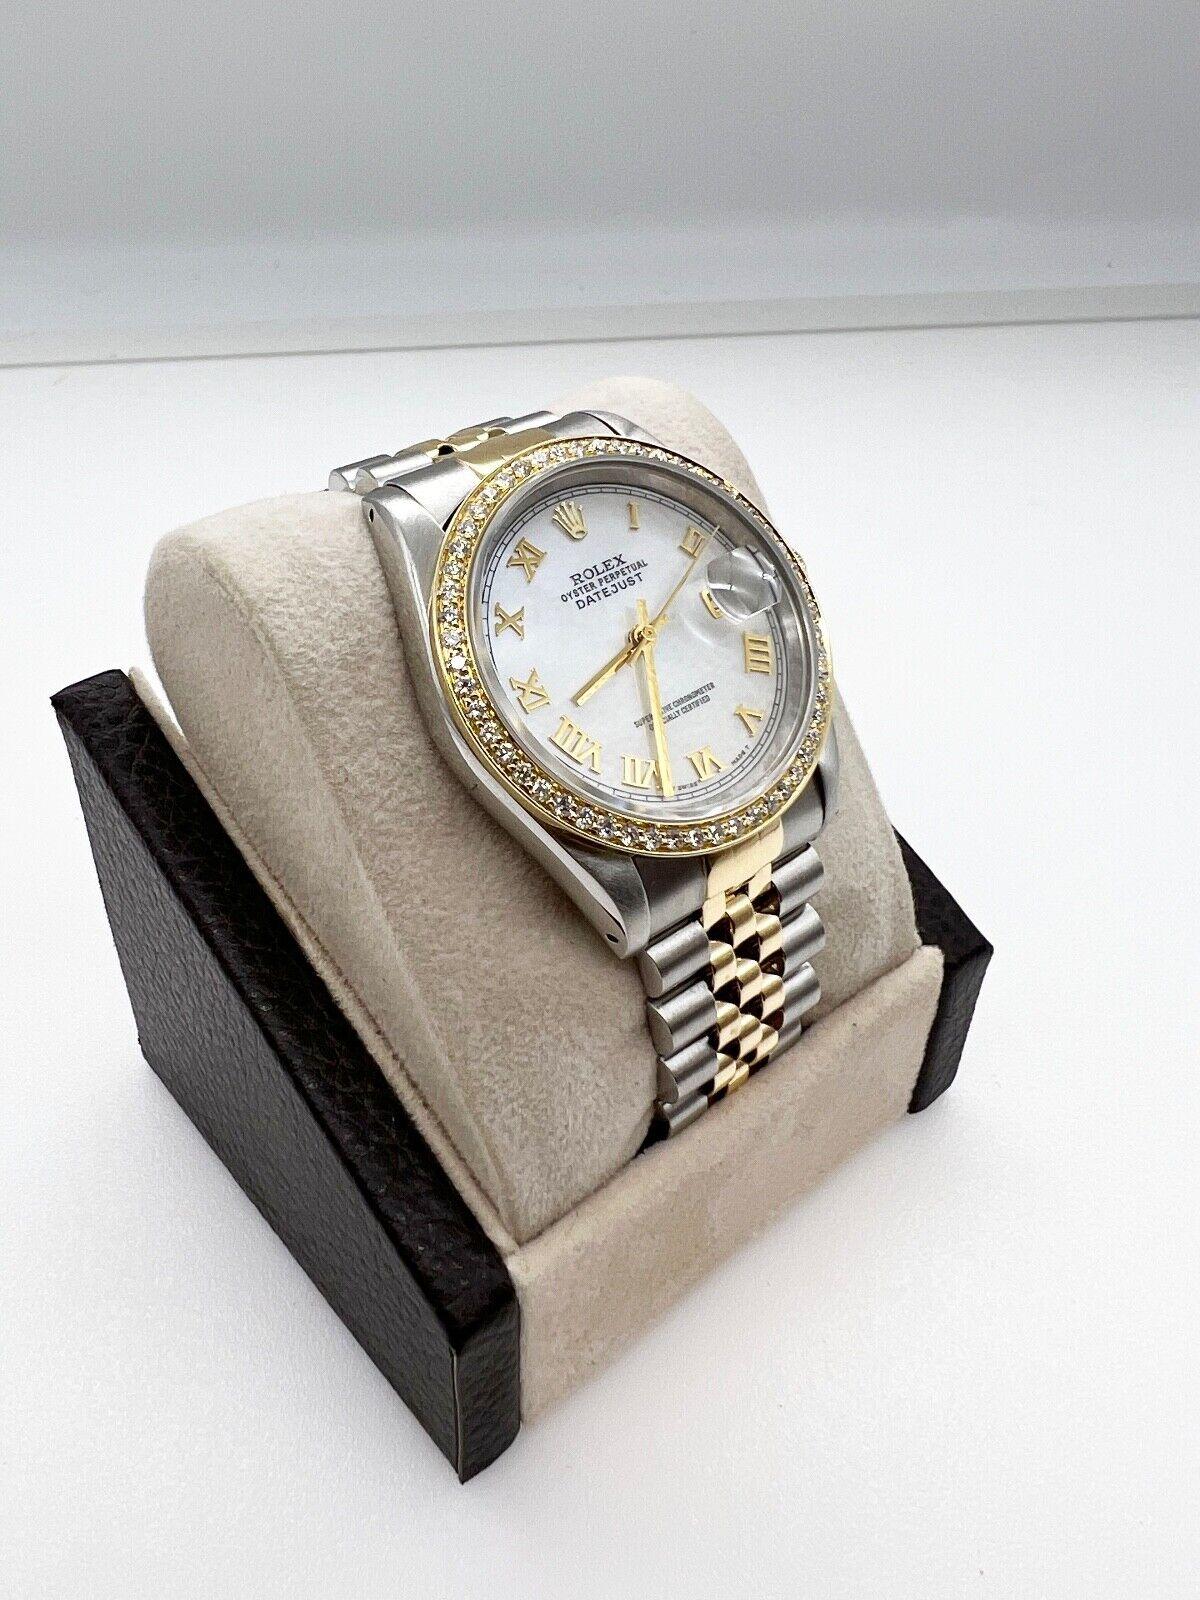 Rolex Datejust 16233 MOP Dial Diamond Bezel 18K Yellow Gold Stainless Steel In Excellent Condition For Sale In San Diego, CA